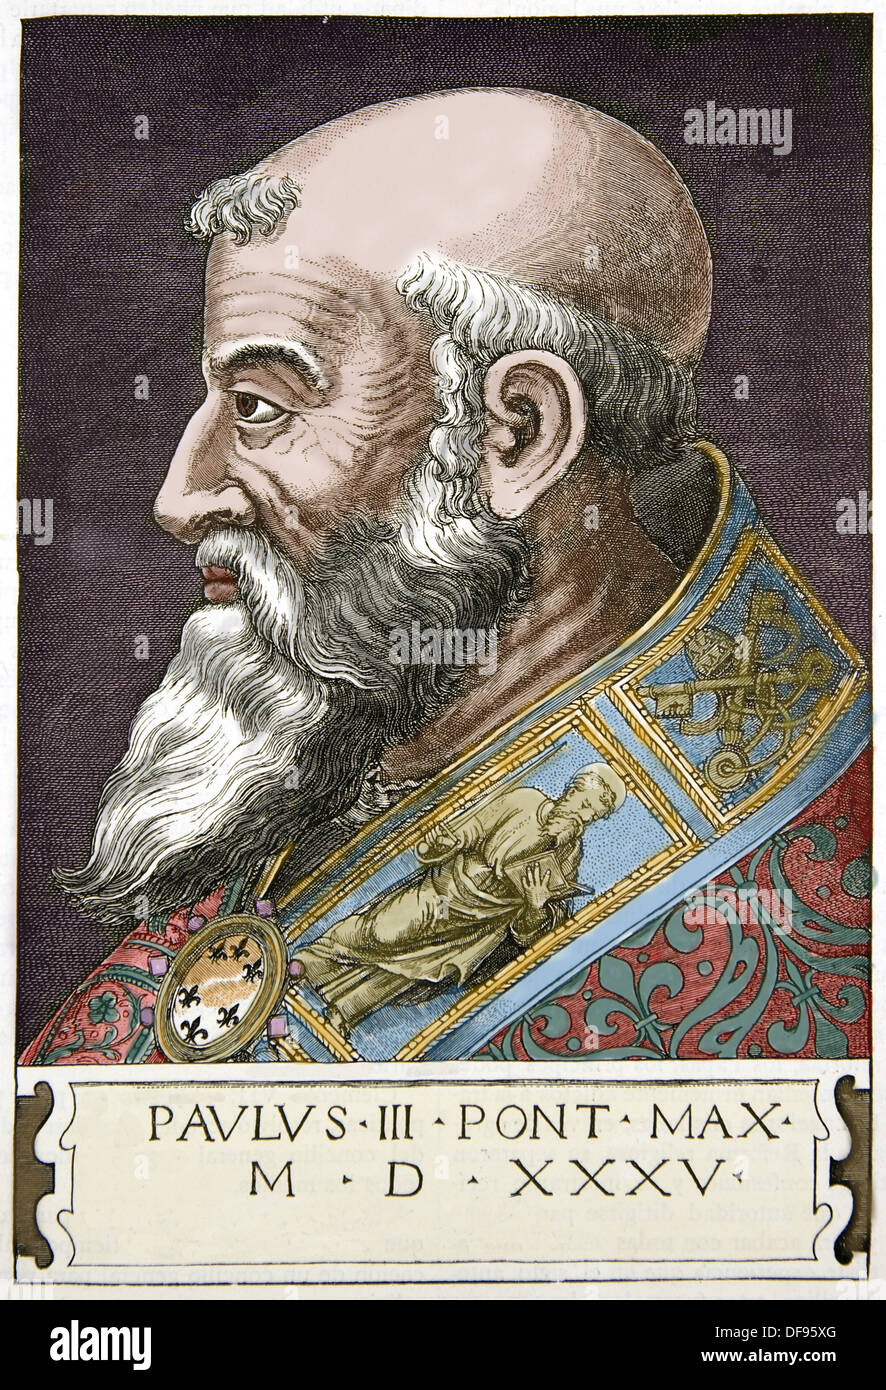 Paul IV (1476 –1559), Gian Pietro Carafa, was Pope from 23 May 1555 until his death. Colored engraving. Stock Photo